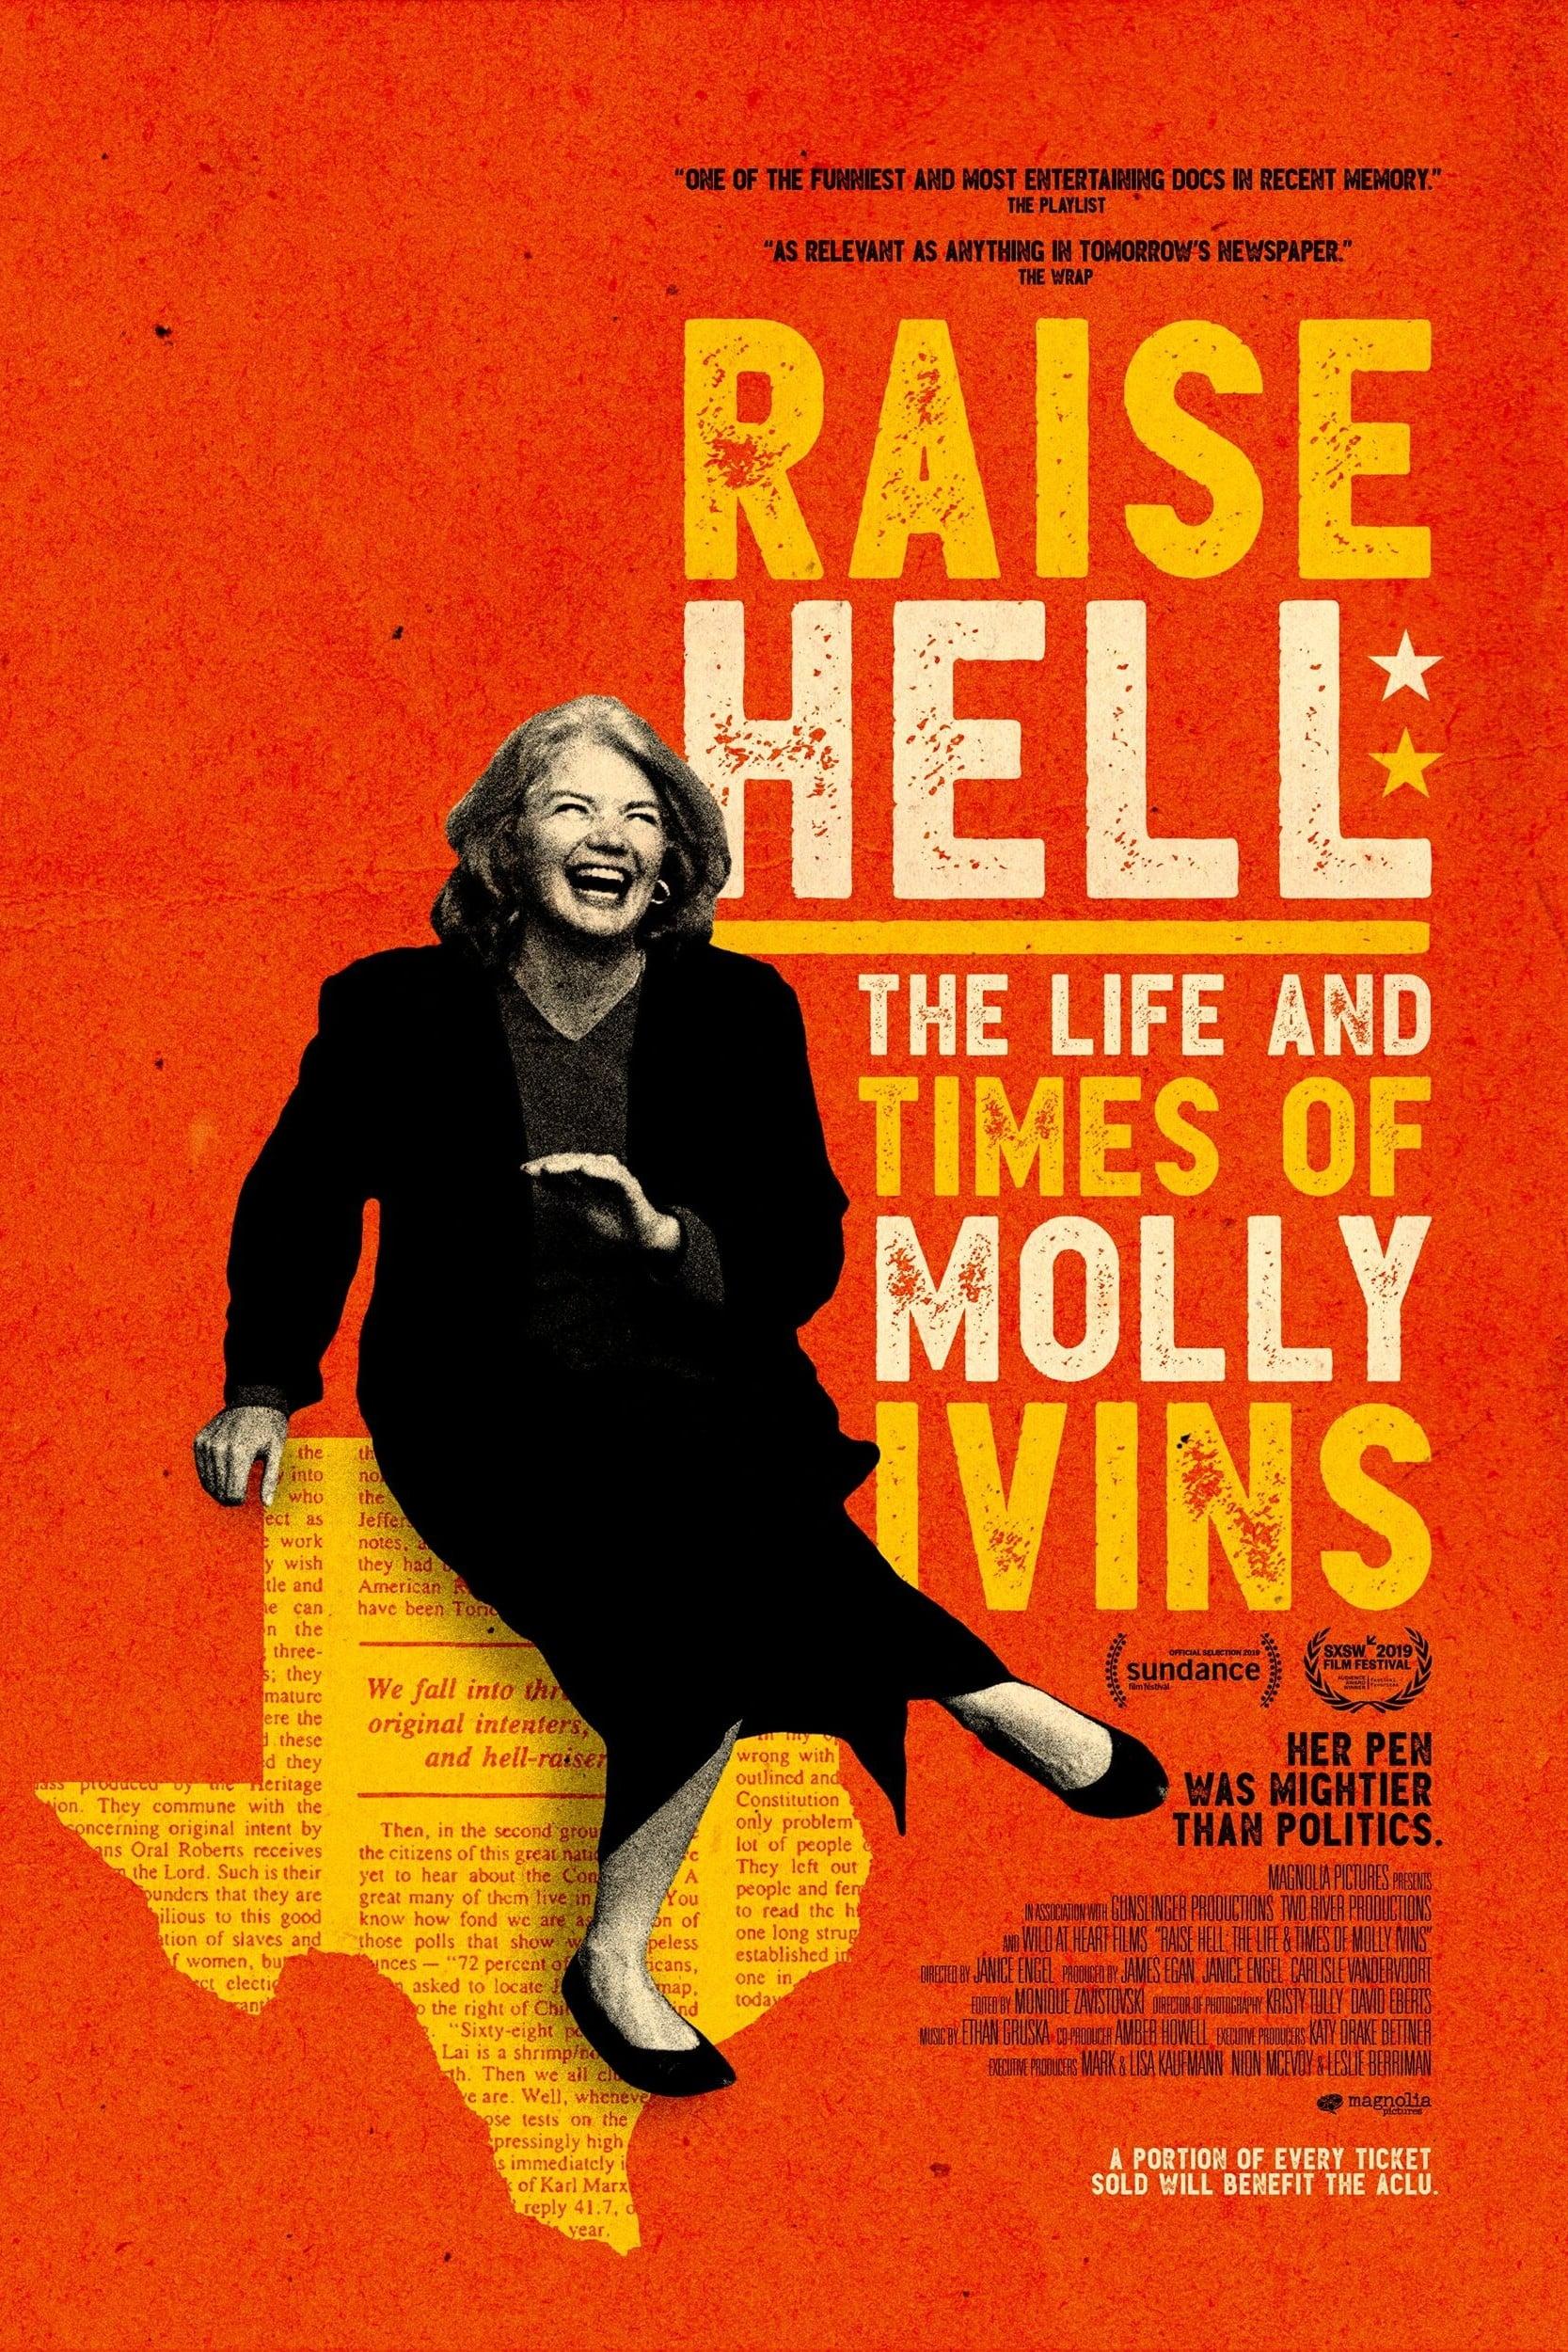 Raise Hell: The Life & Times of Molly Ivins poster